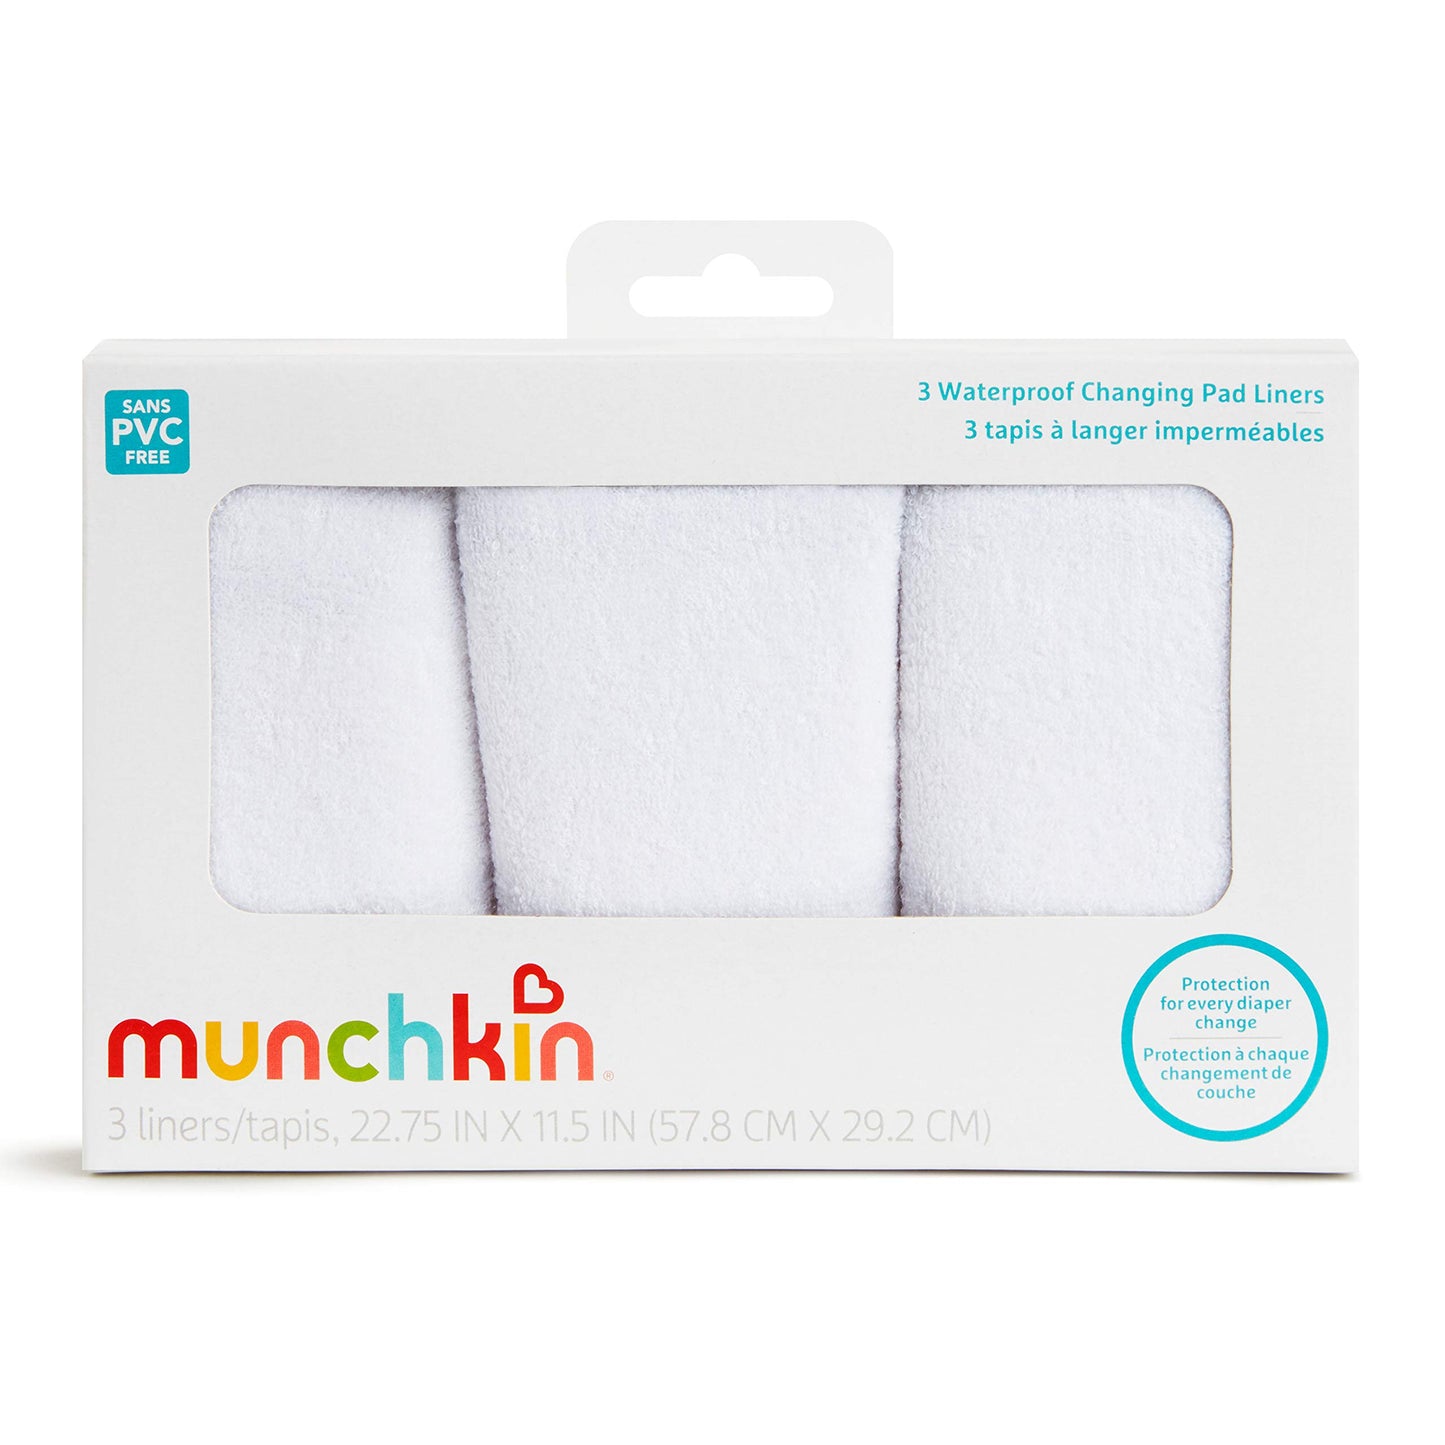 Munchkin Waterproof Changing Pad Liners, Pack of 3, White